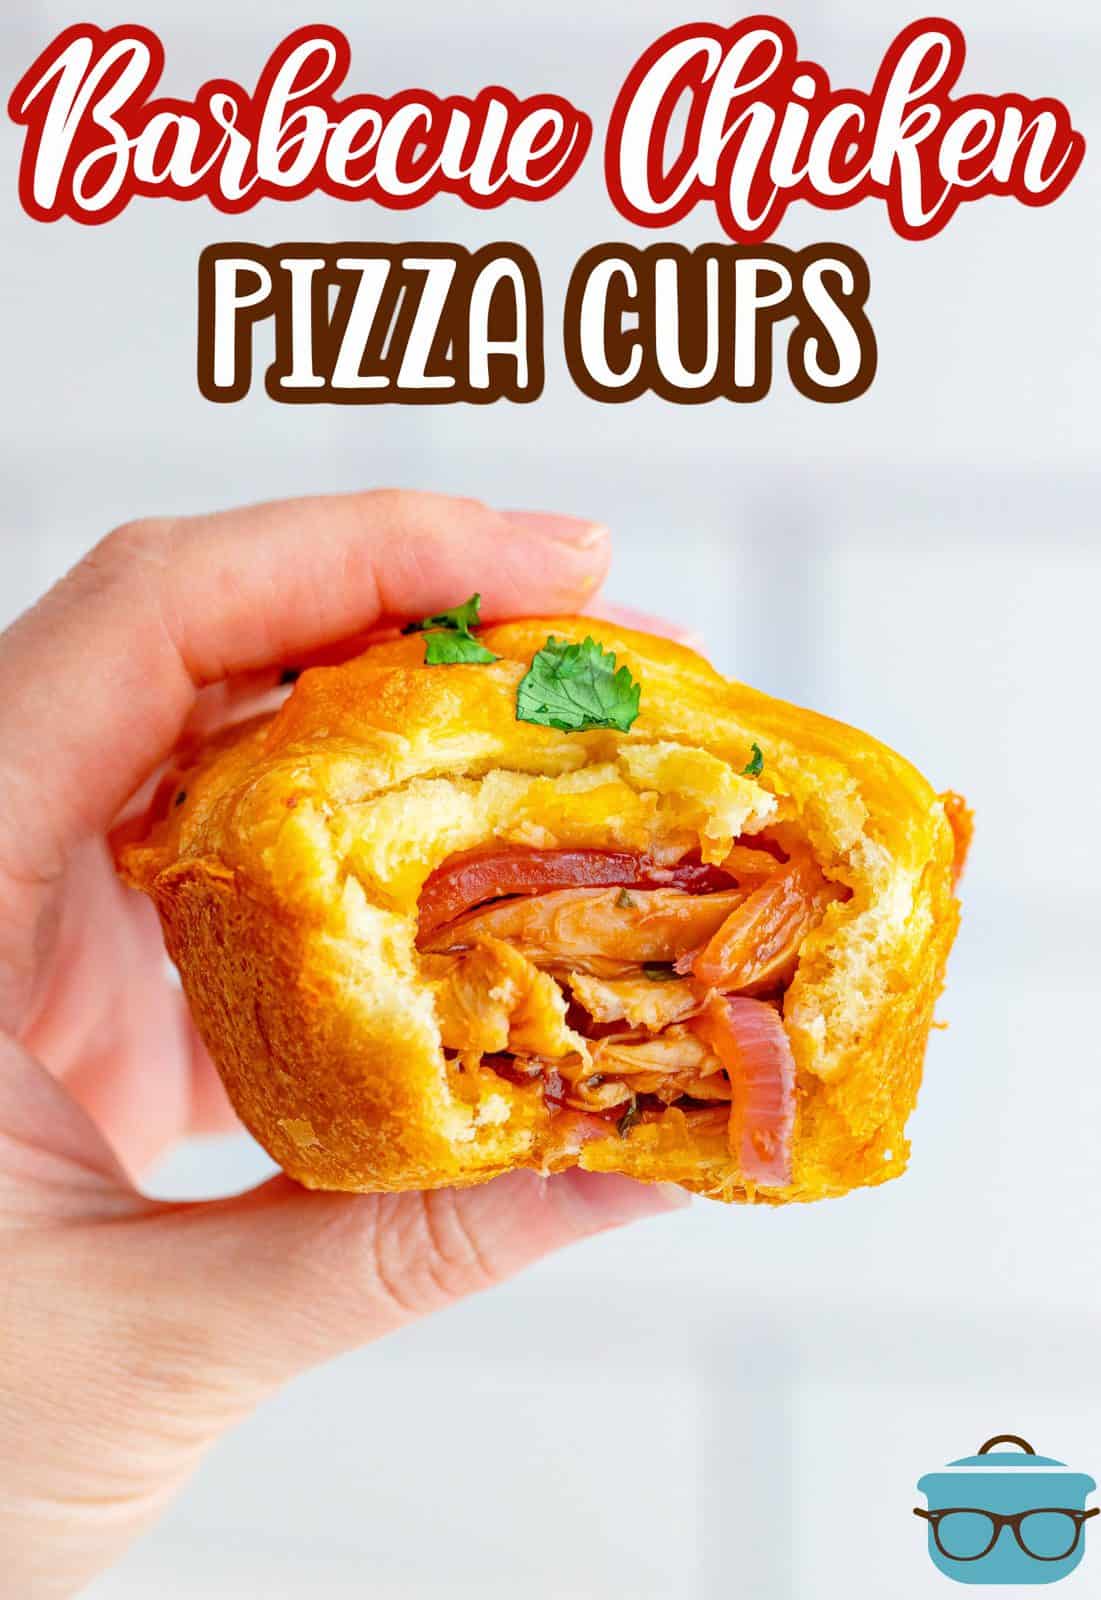 Pinterest image of hand holding one BBQ Chicken Pizza Cup with bite taken out sowing filling.